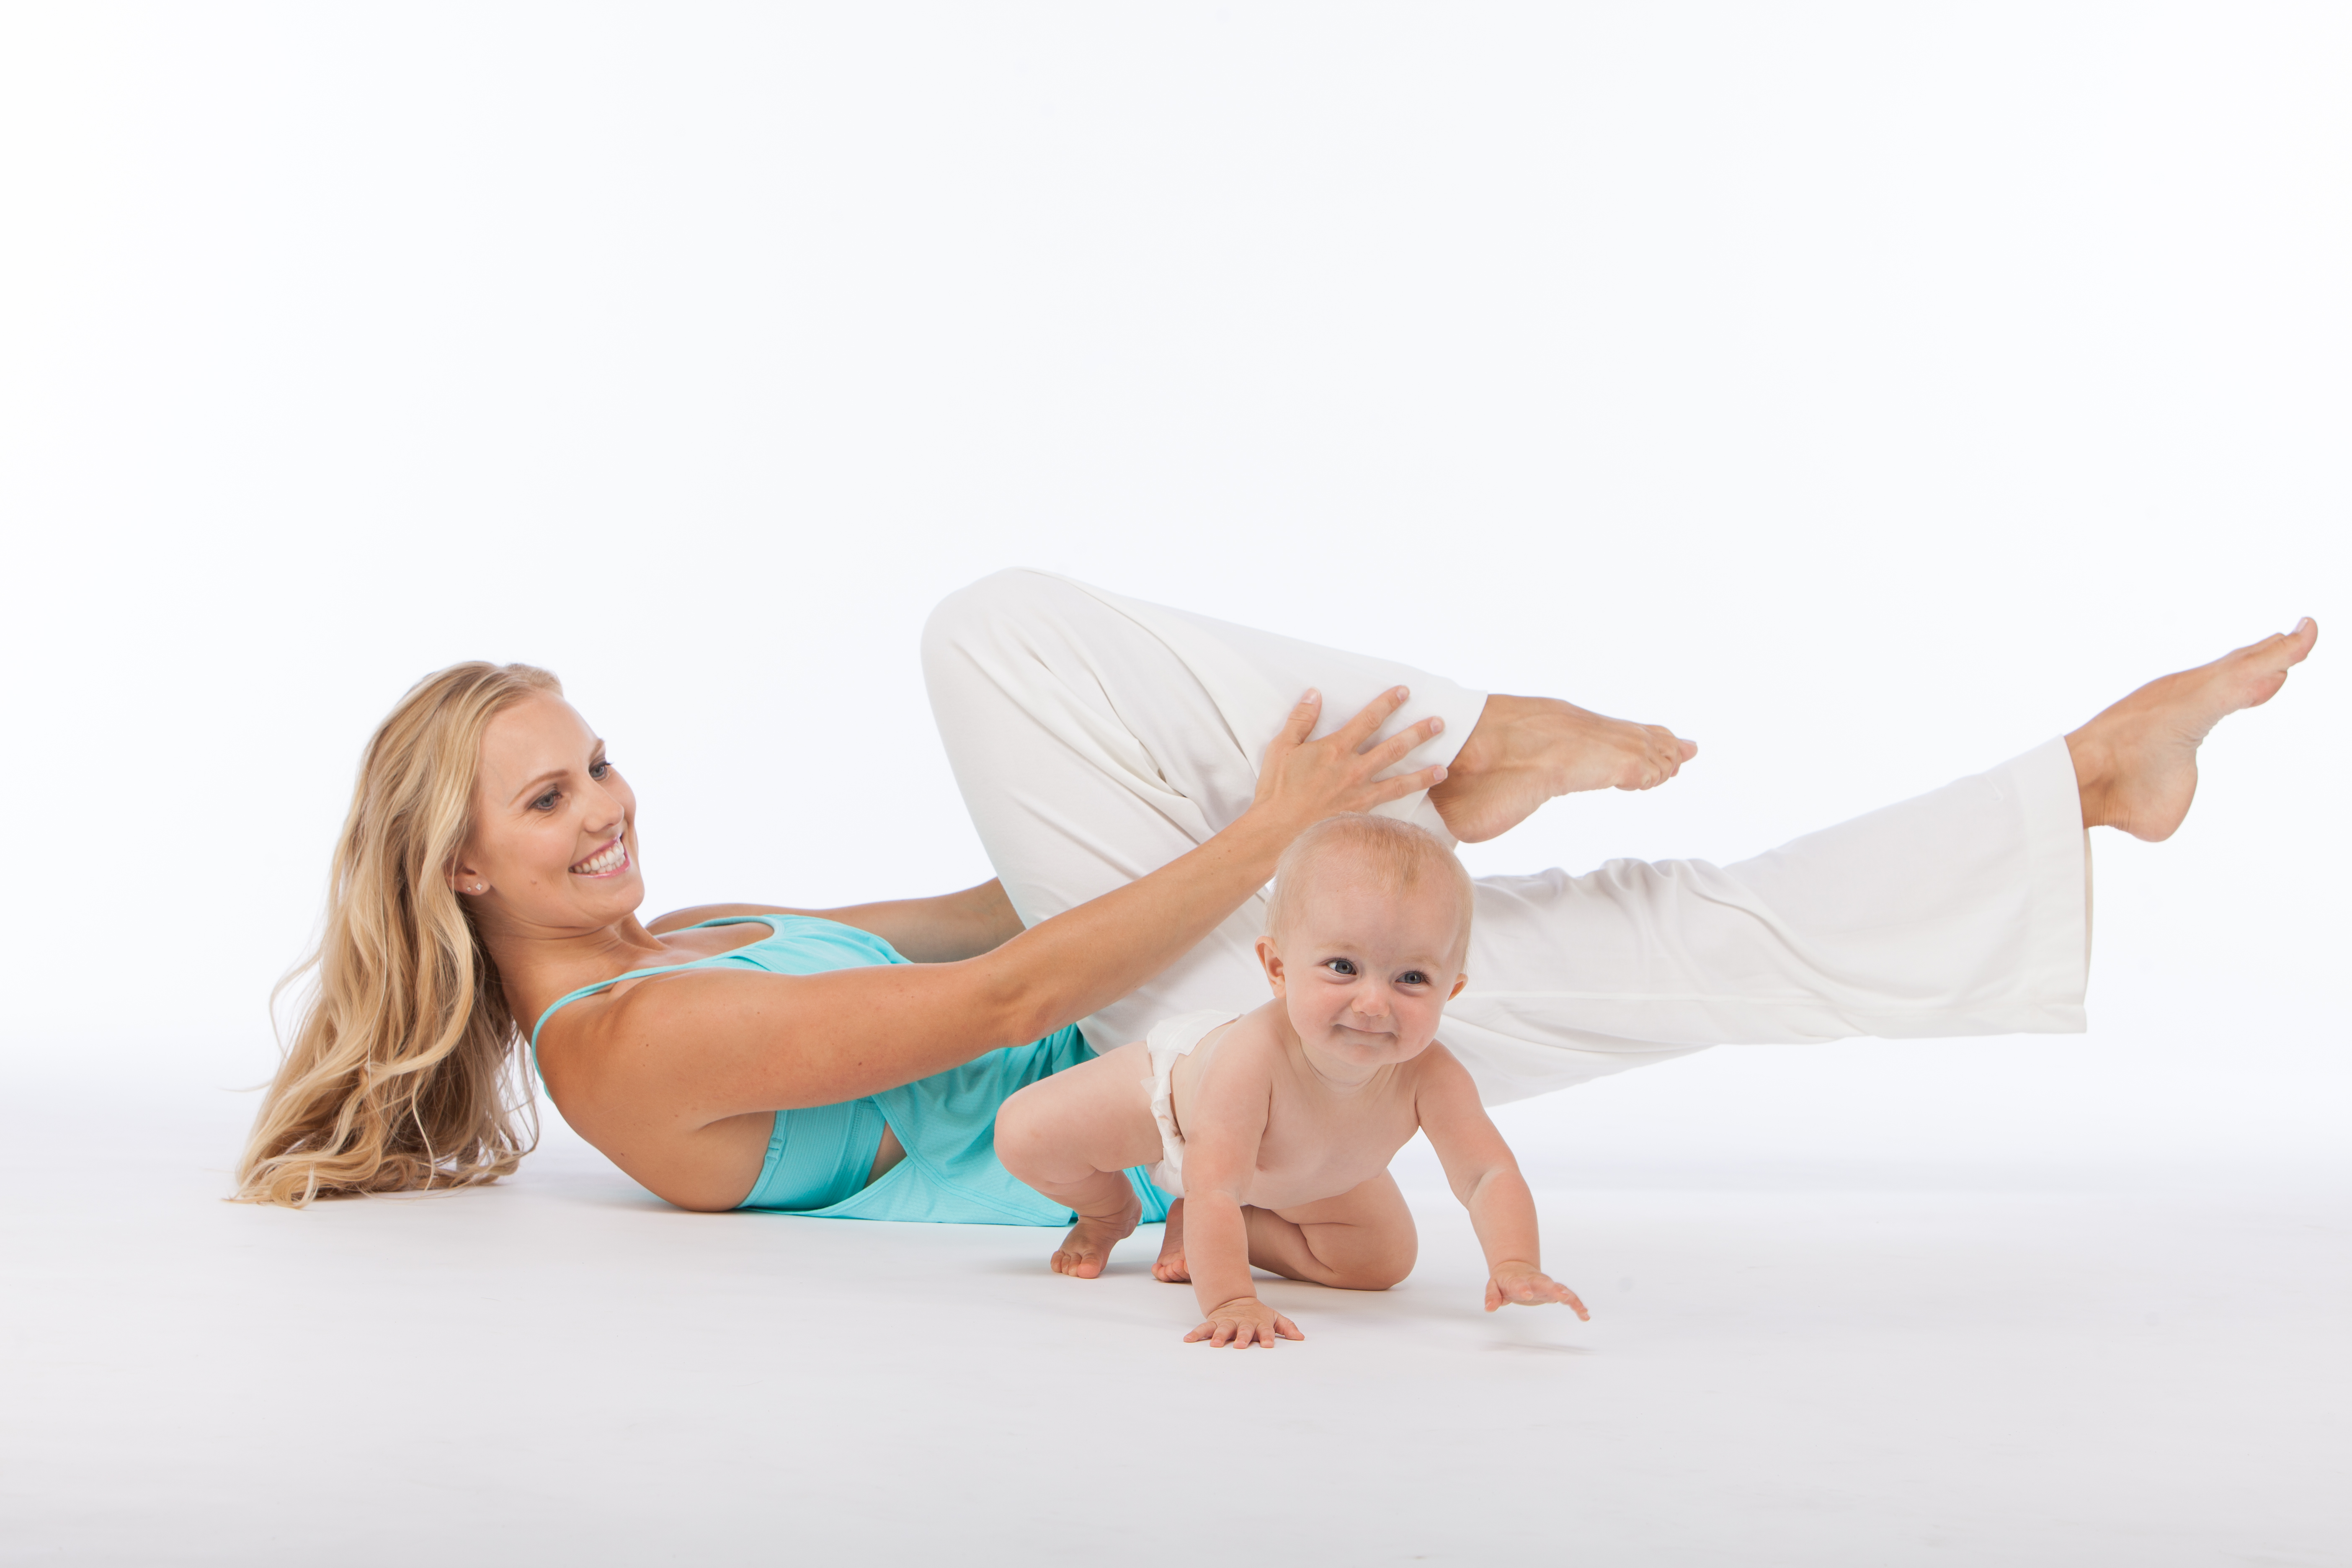 Fit Moms Fitting in Exercise! - Knocked-Up Fitness®